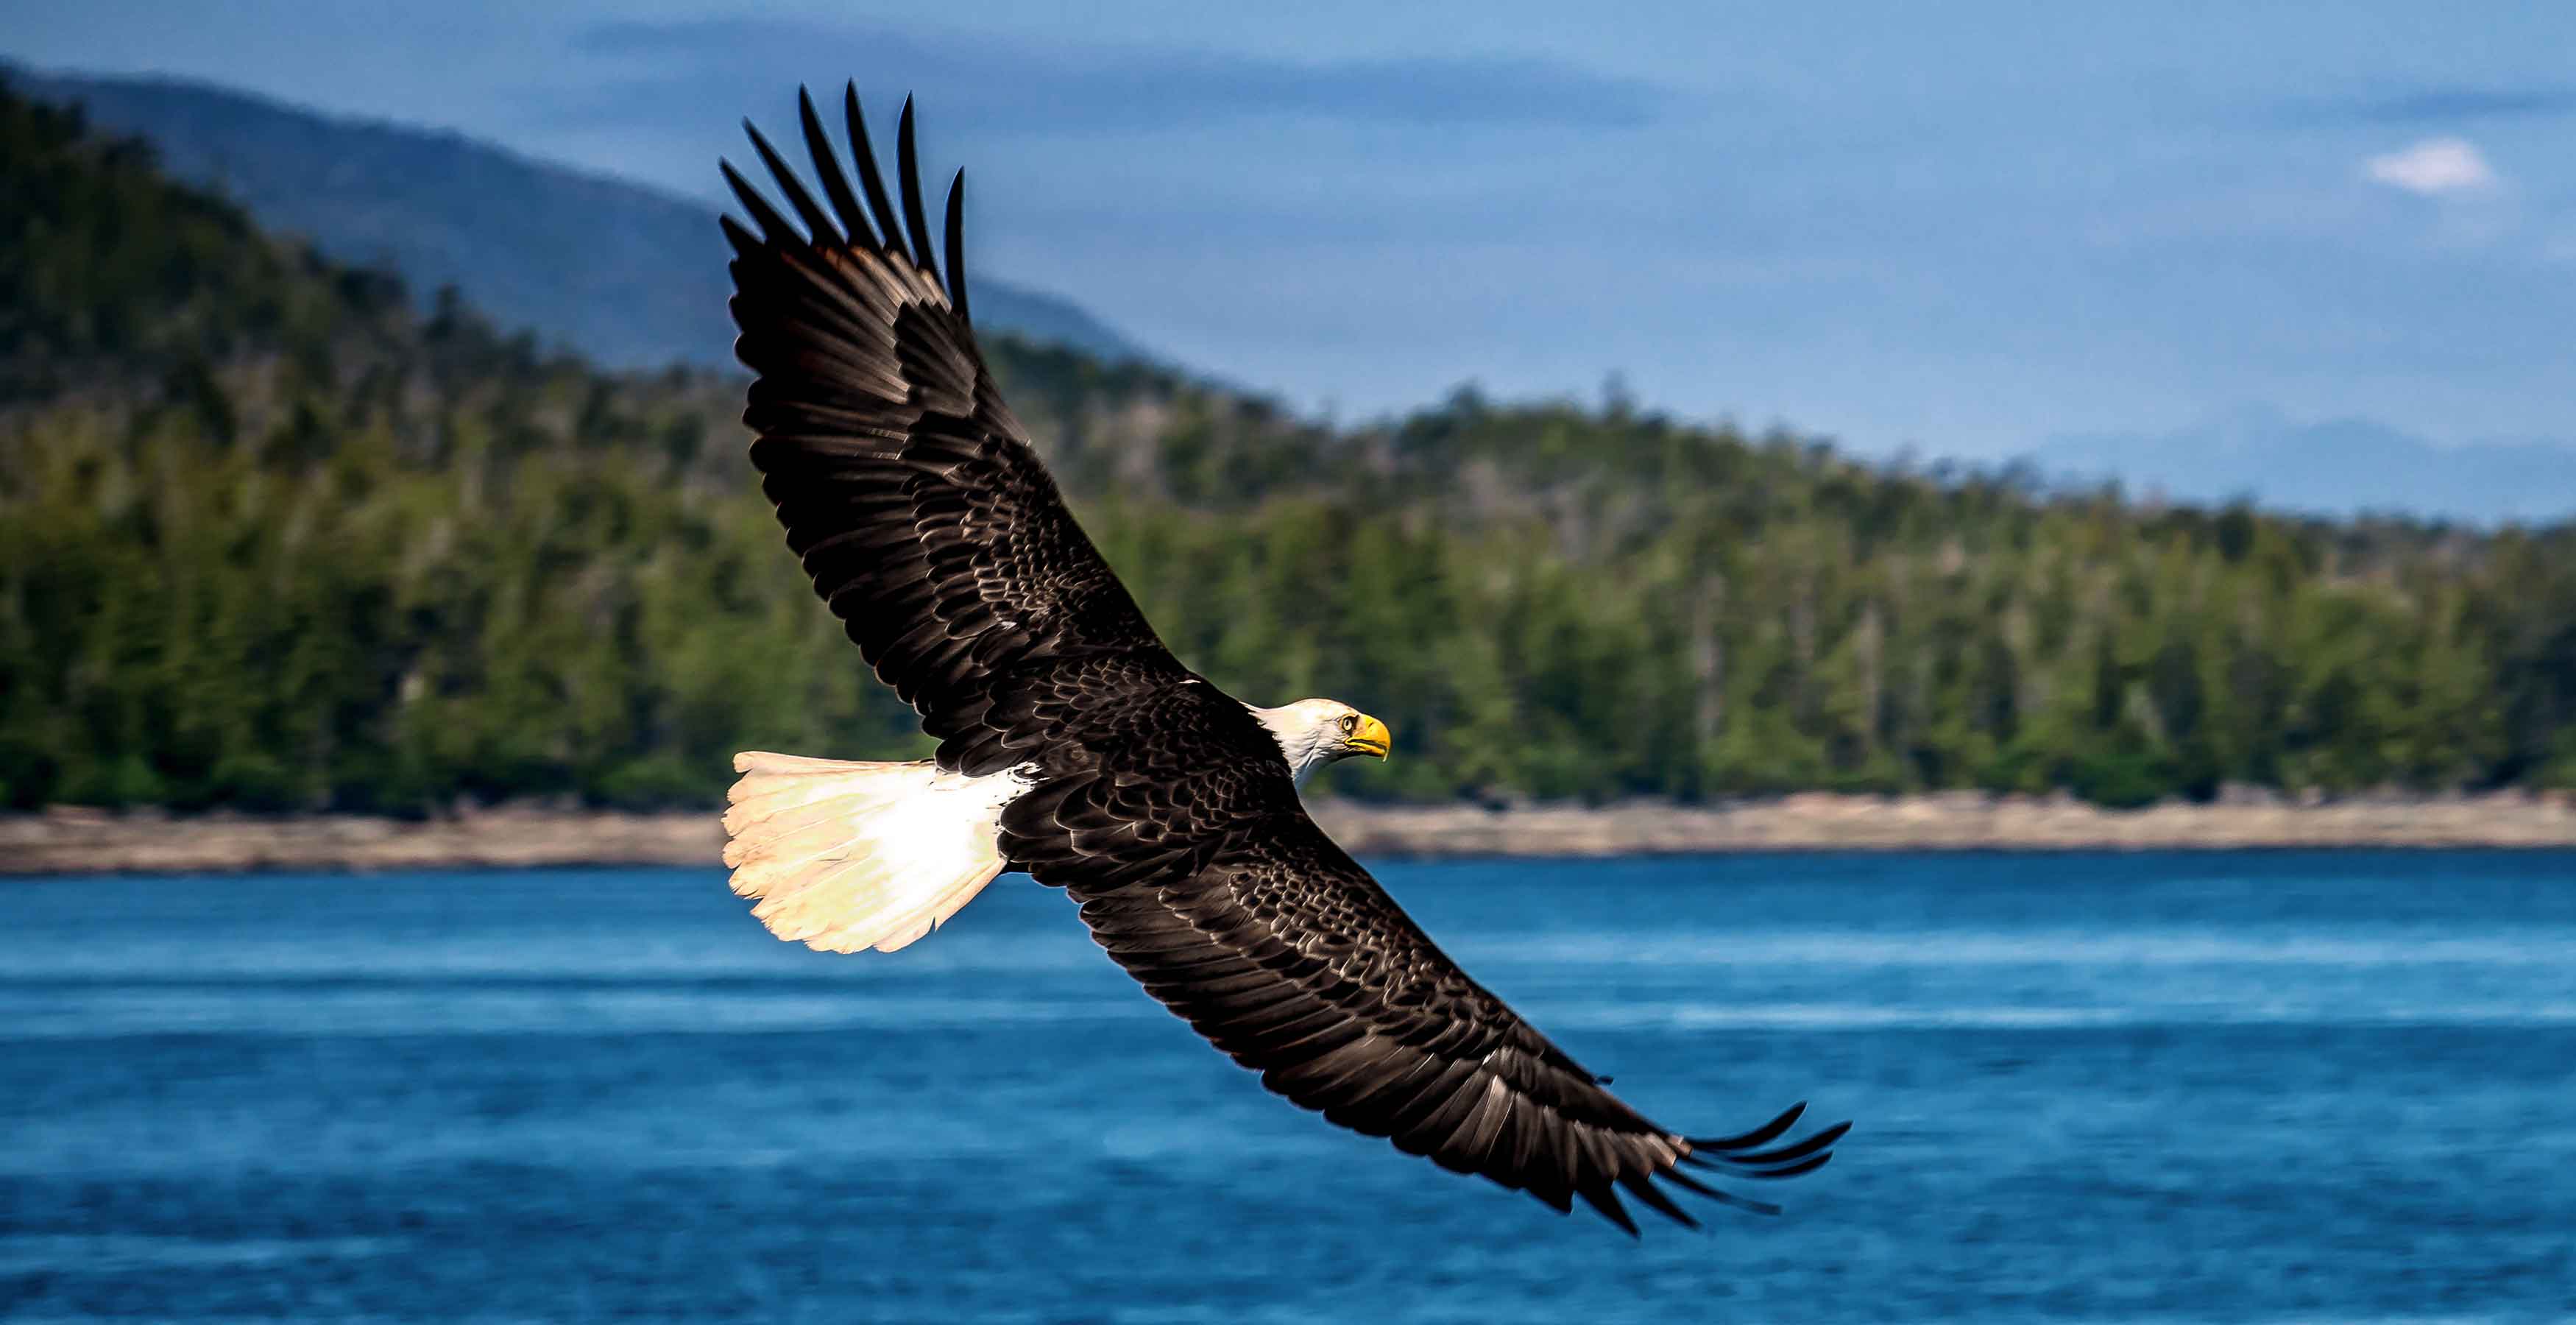 Bald eagle flying over forest and sea